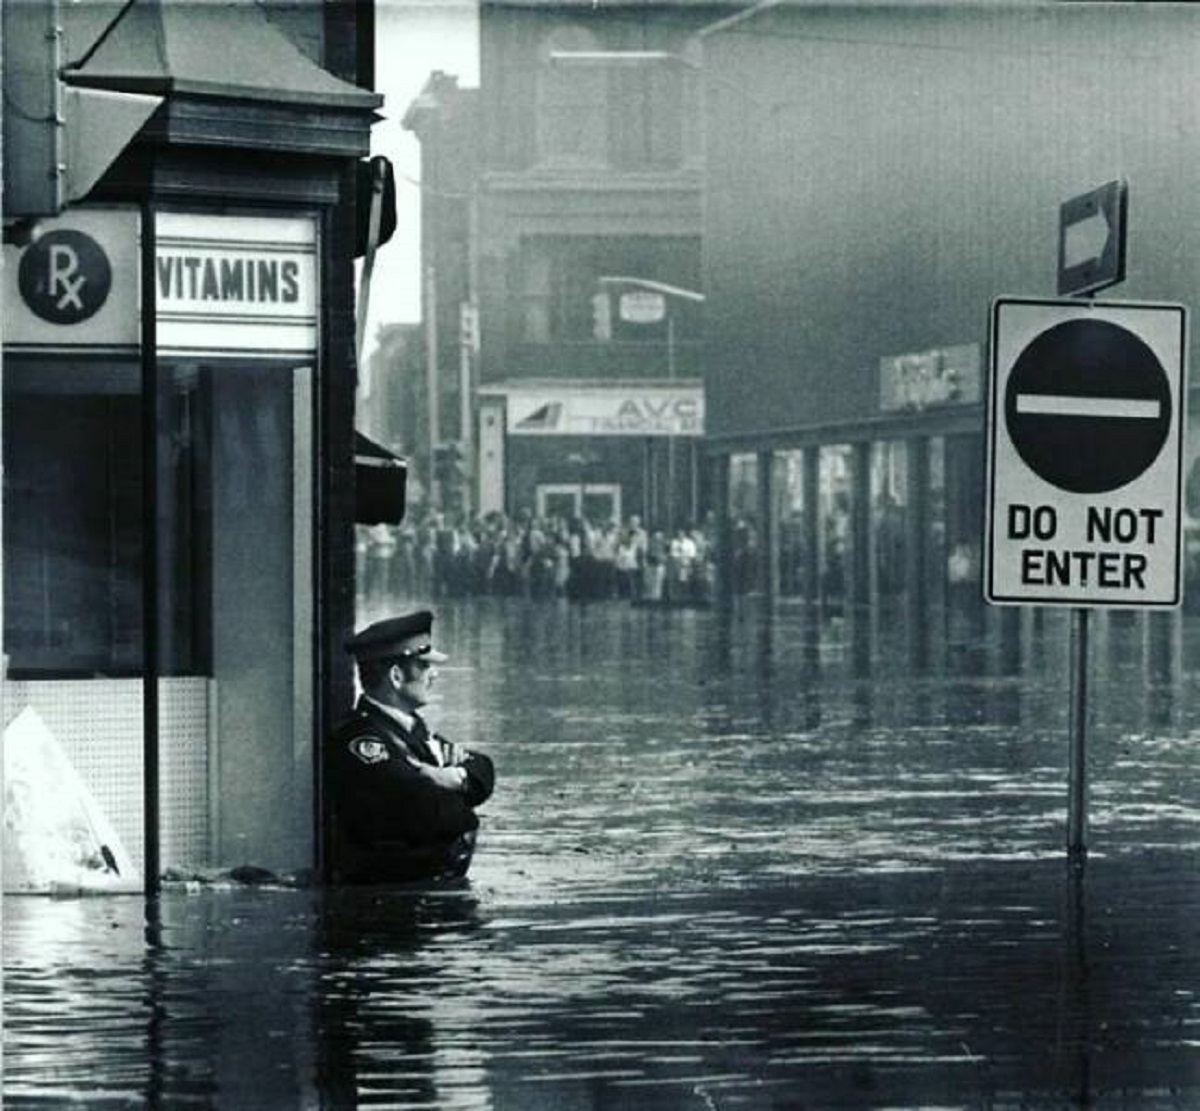 "Canadian Police Officer Guarding The Pharmacy In Waist-High Flood Waters In Galt, Ontario, 1974"